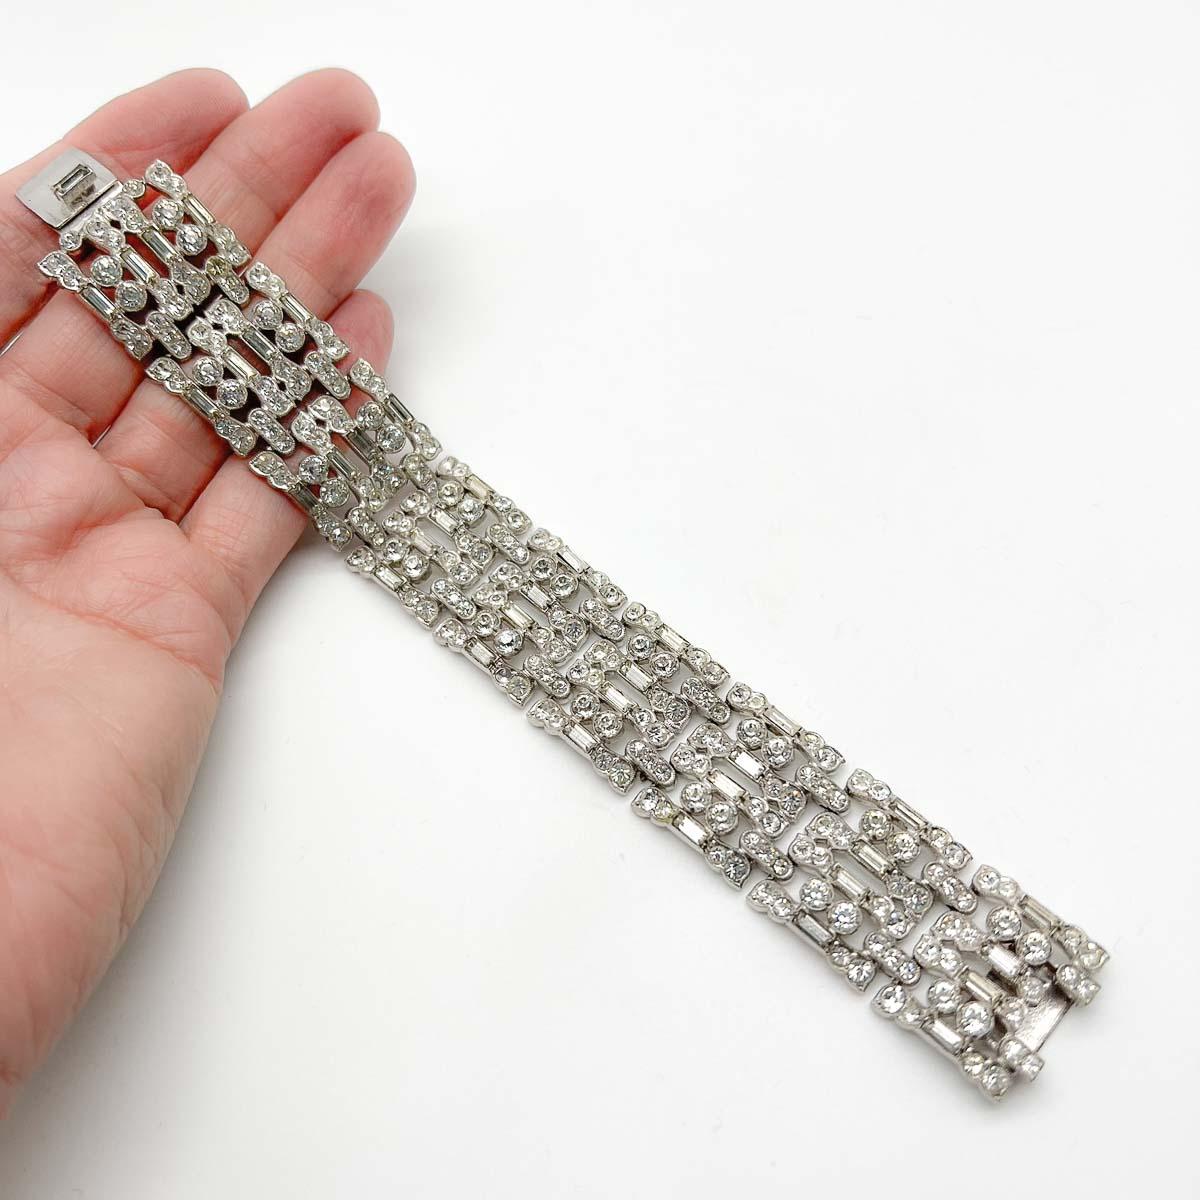 A divine original Vintage Deco cocktail bracelet, very nearly an antique. Think art deco bars, cocktails and dancing the evening away. The tank track style design is crafted to perfection in high quality rhodium plated metal, beautifully set with